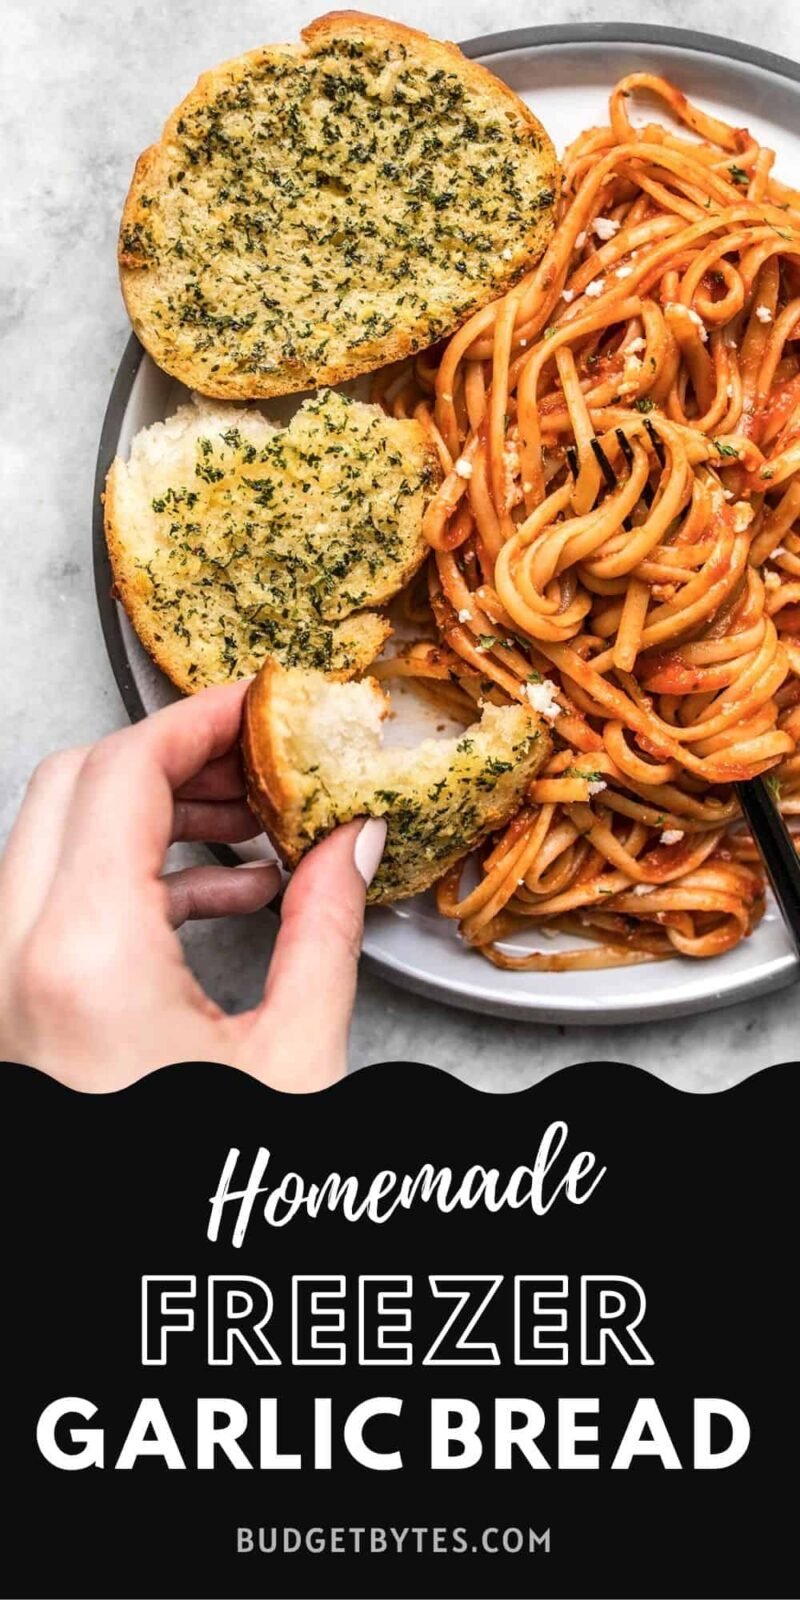 Slices of garlic bread on a plate of pasta, title text at the bottom